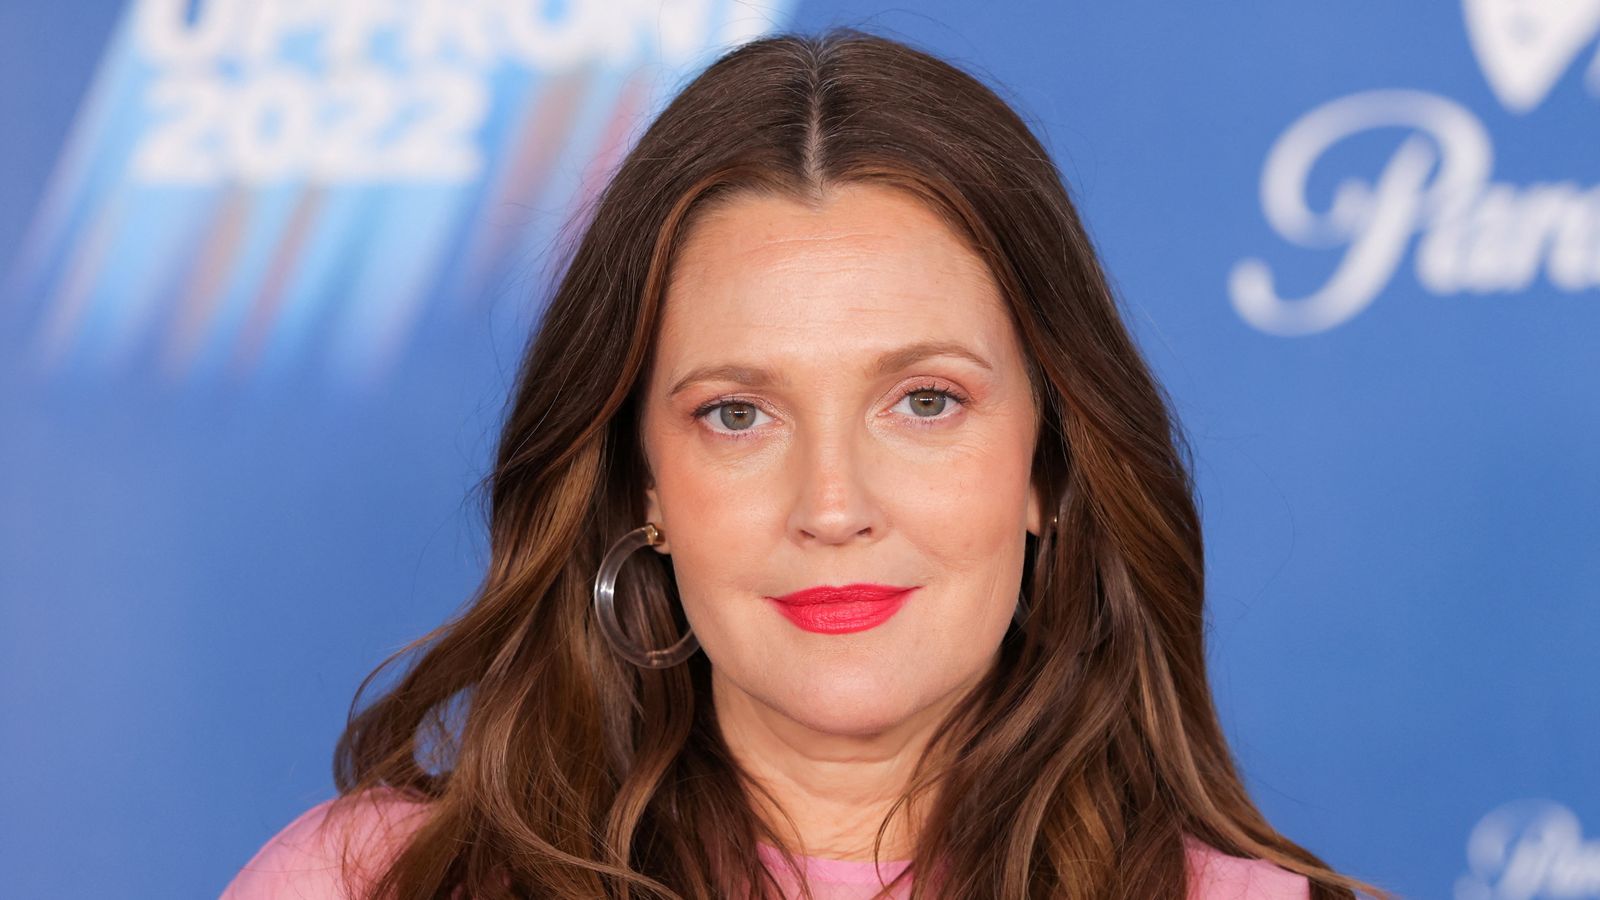 Drew Barrymore apologises for bringing talk show back during Hollywood writers strike | Ents & Arts News